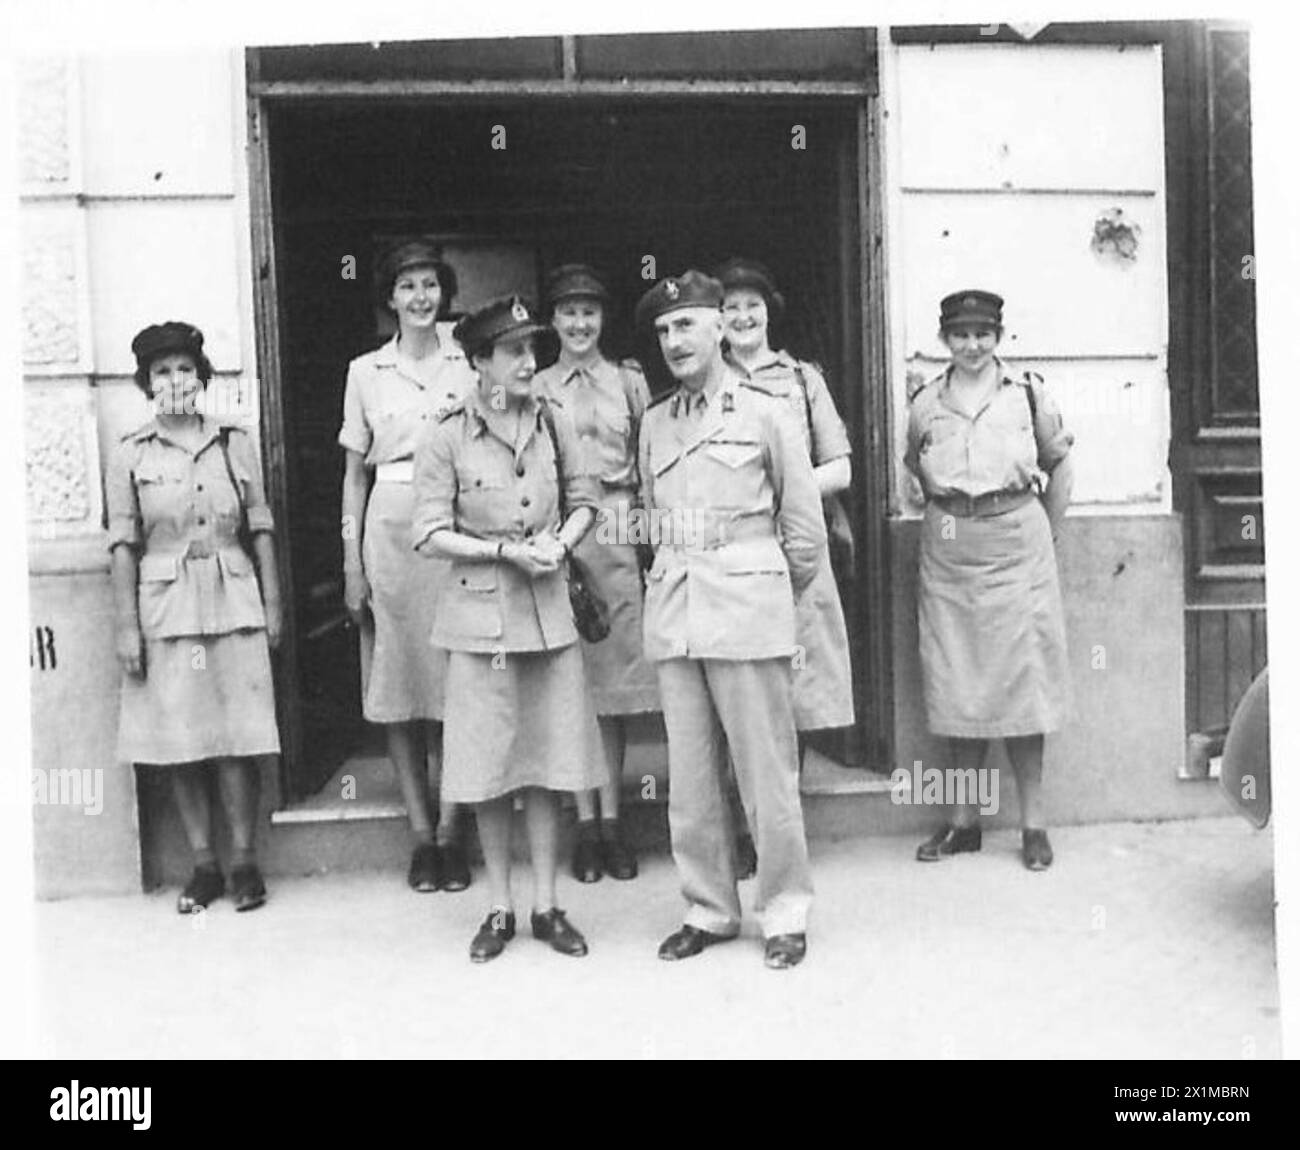 CHIEF OF THE A.T.S. IN ITALY - Mrs. Whateley and Brigadier Woods during their tour of Roberts Barracks. Behind, left to right, are:- S.Condr.B.L. Smith; Sub. J. Lander; Jnr.Comdr. V. Stride, Jnr.Comdr.Menzieas and Snr.Comdr. M.B. Baker, British Army Stock Photo